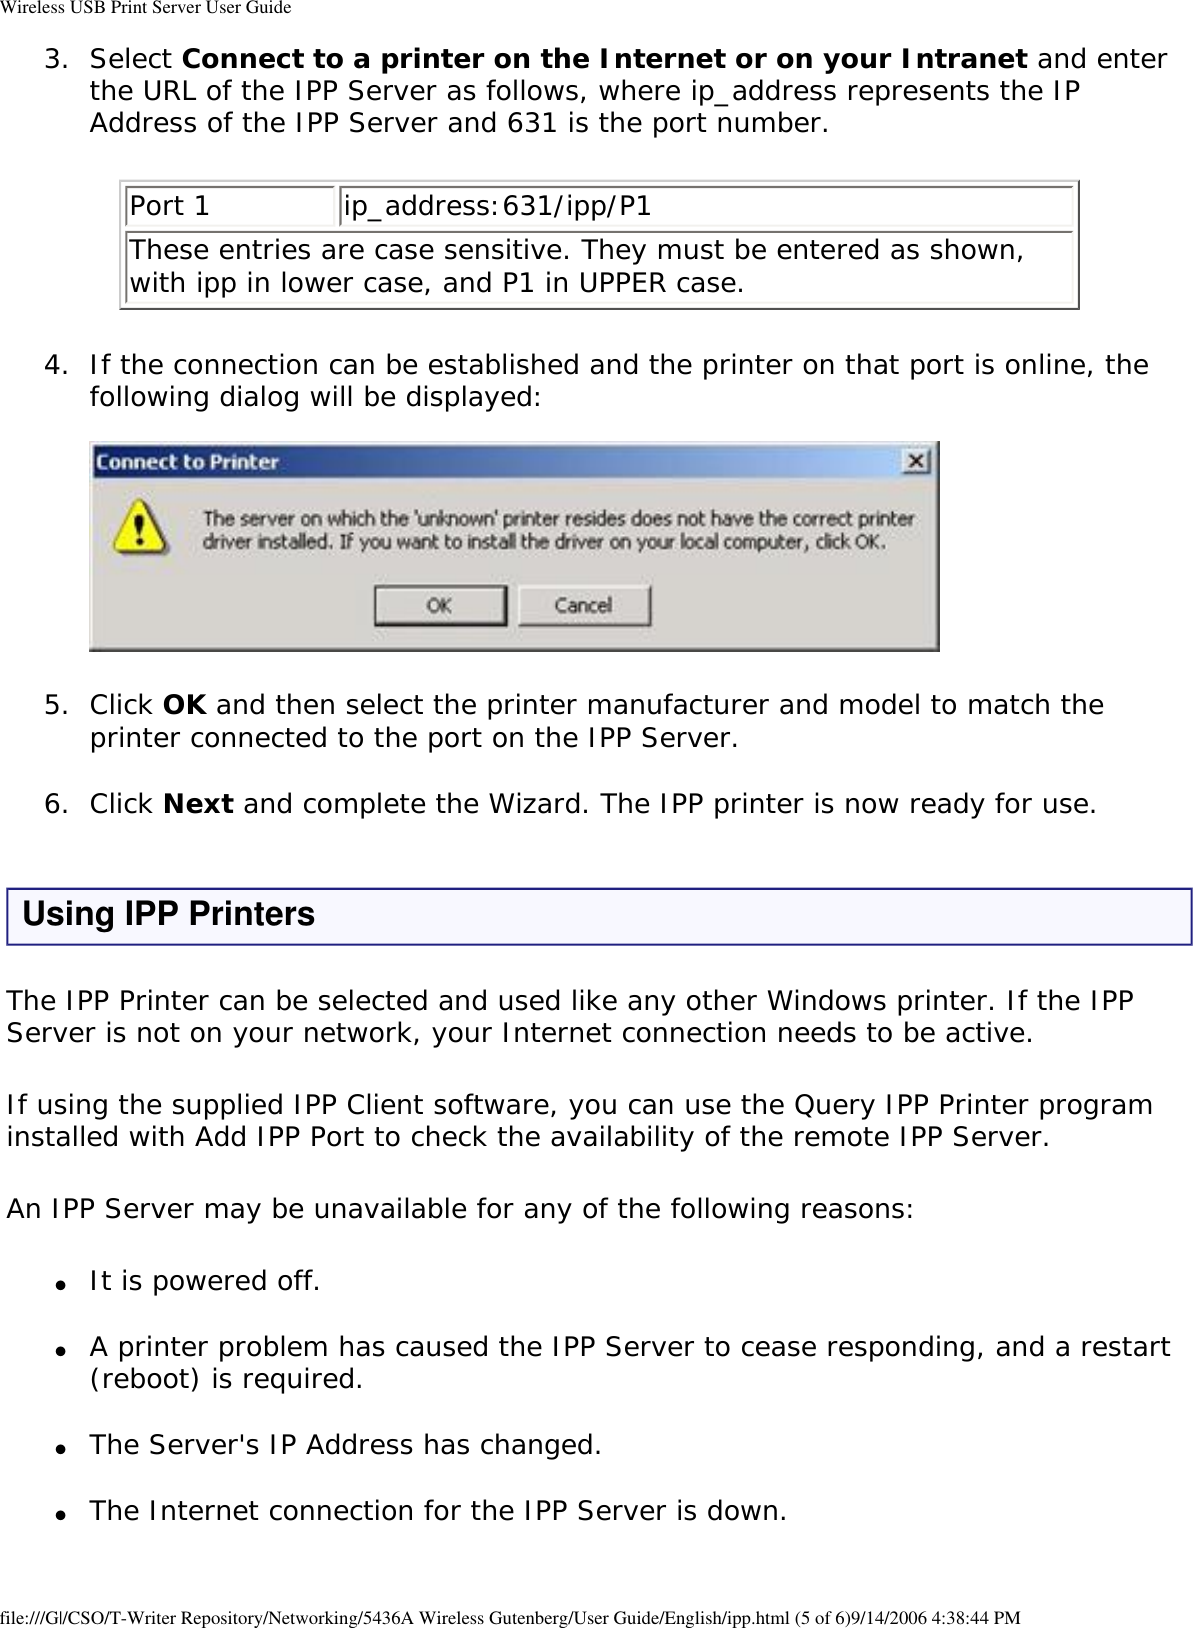 Wireless USB Print Server User Guide3.  Select Connect to a printer on the Internet or on your Intranet and enter the URL of the IPP Server as follows, where ip_address represents the IP Address of the IPP Server and 631 is the port number. Port 1 ip_address:631/ipp/P1These entries are case sensitive. They must be entered as shown, with ipp in lower case, and P1 in UPPER case.4.  If the connection can be established and the printer on that port is online, the following dialog will be displayed:    5.  Click OK and then select the printer manufacturer and model to match the printer connected to the port on the IPP Server. 6.  Click Next and complete the Wizard. The IPP printer is now ready for use. Using IPP PrintersThe IPP Printer can be selected and used like any other Windows printer. If the IPP Server is not on your network, your Internet connection needs to be active.If using the supplied IPP Client software, you can use the Query IPP Printer program installed with Add IPP Port to check the availability of the remote IPP Server.An IPP Server may be unavailable for any of the following reasons:●     It is powered off. ●     A printer problem has caused the IPP Server to cease responding, and a restart (reboot) is required. ●     The Server&apos;s IP Address has changed. ●     The Internet connection for the IPP Server is down. file:///G|/CSO/T-Writer Repository/Networking/5436A Wireless Gutenberg/User Guide/English/ipp.html (5 of 6)9/14/2006 4:38:44 PM